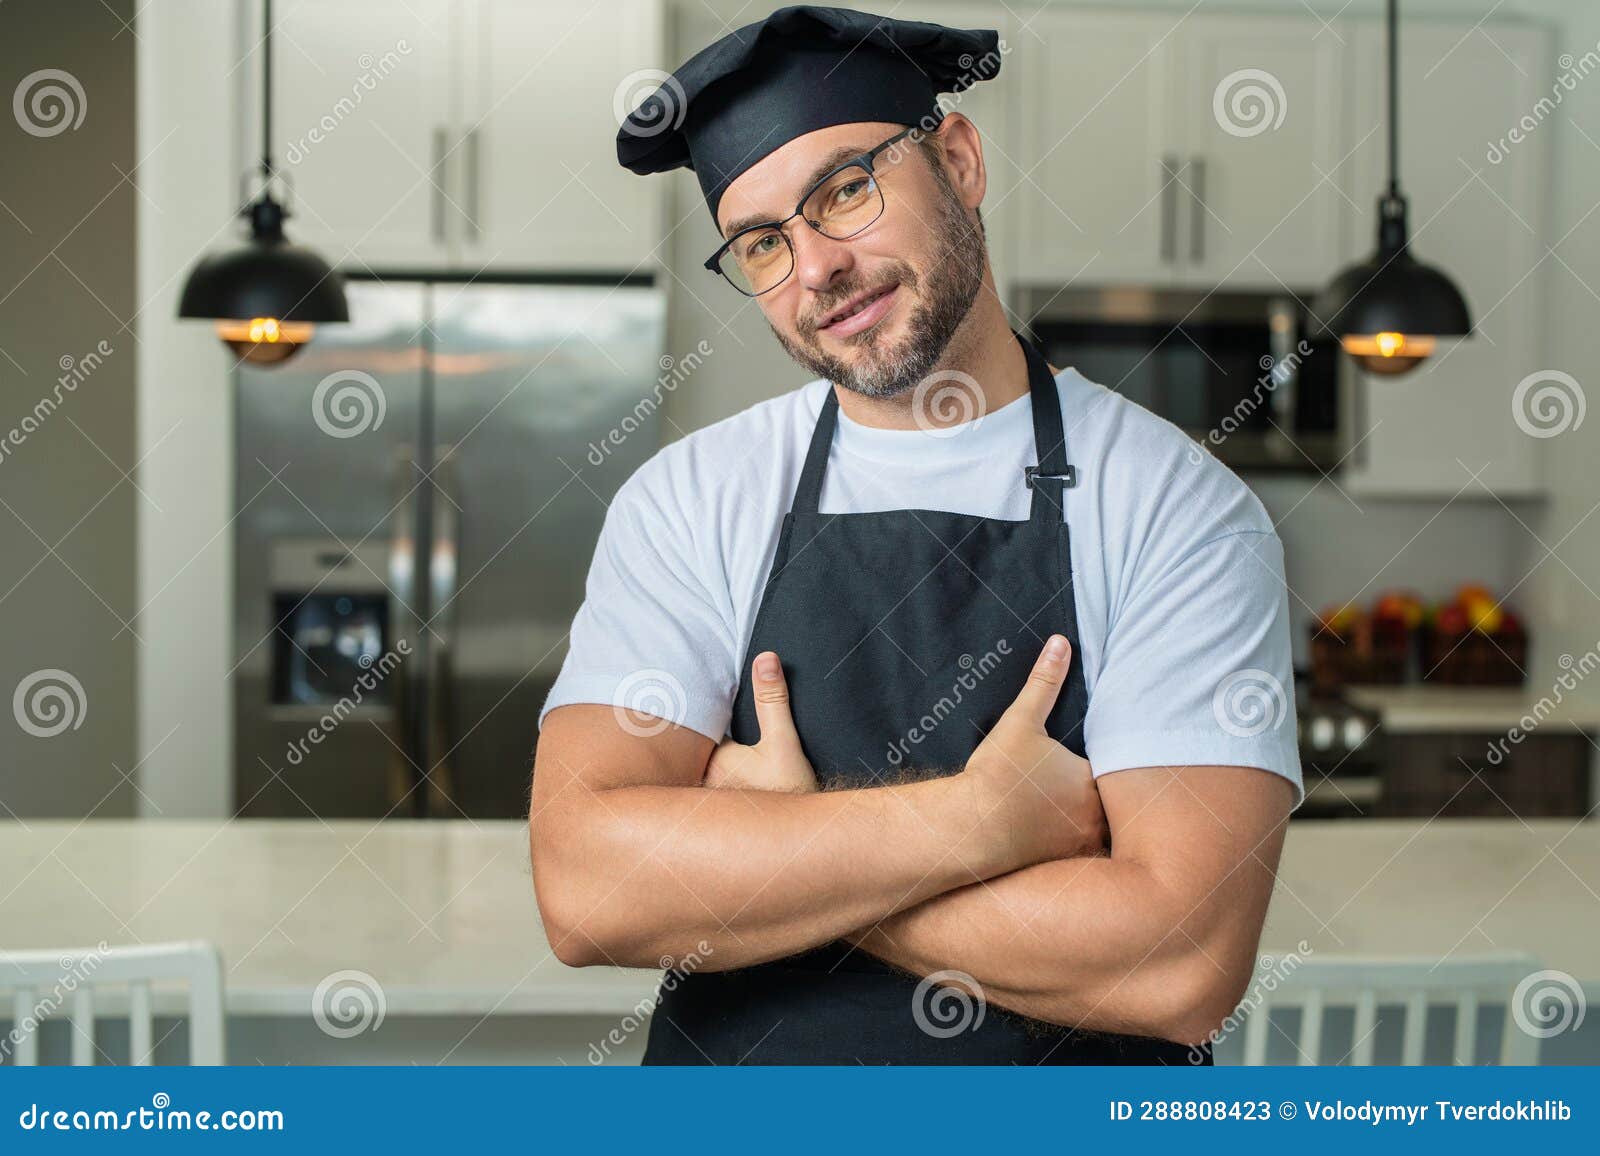 Man Chef Cooker Baker Millennial Male Chef In Chefs Uniform Chef Man Cooking On Kitchen Chef 